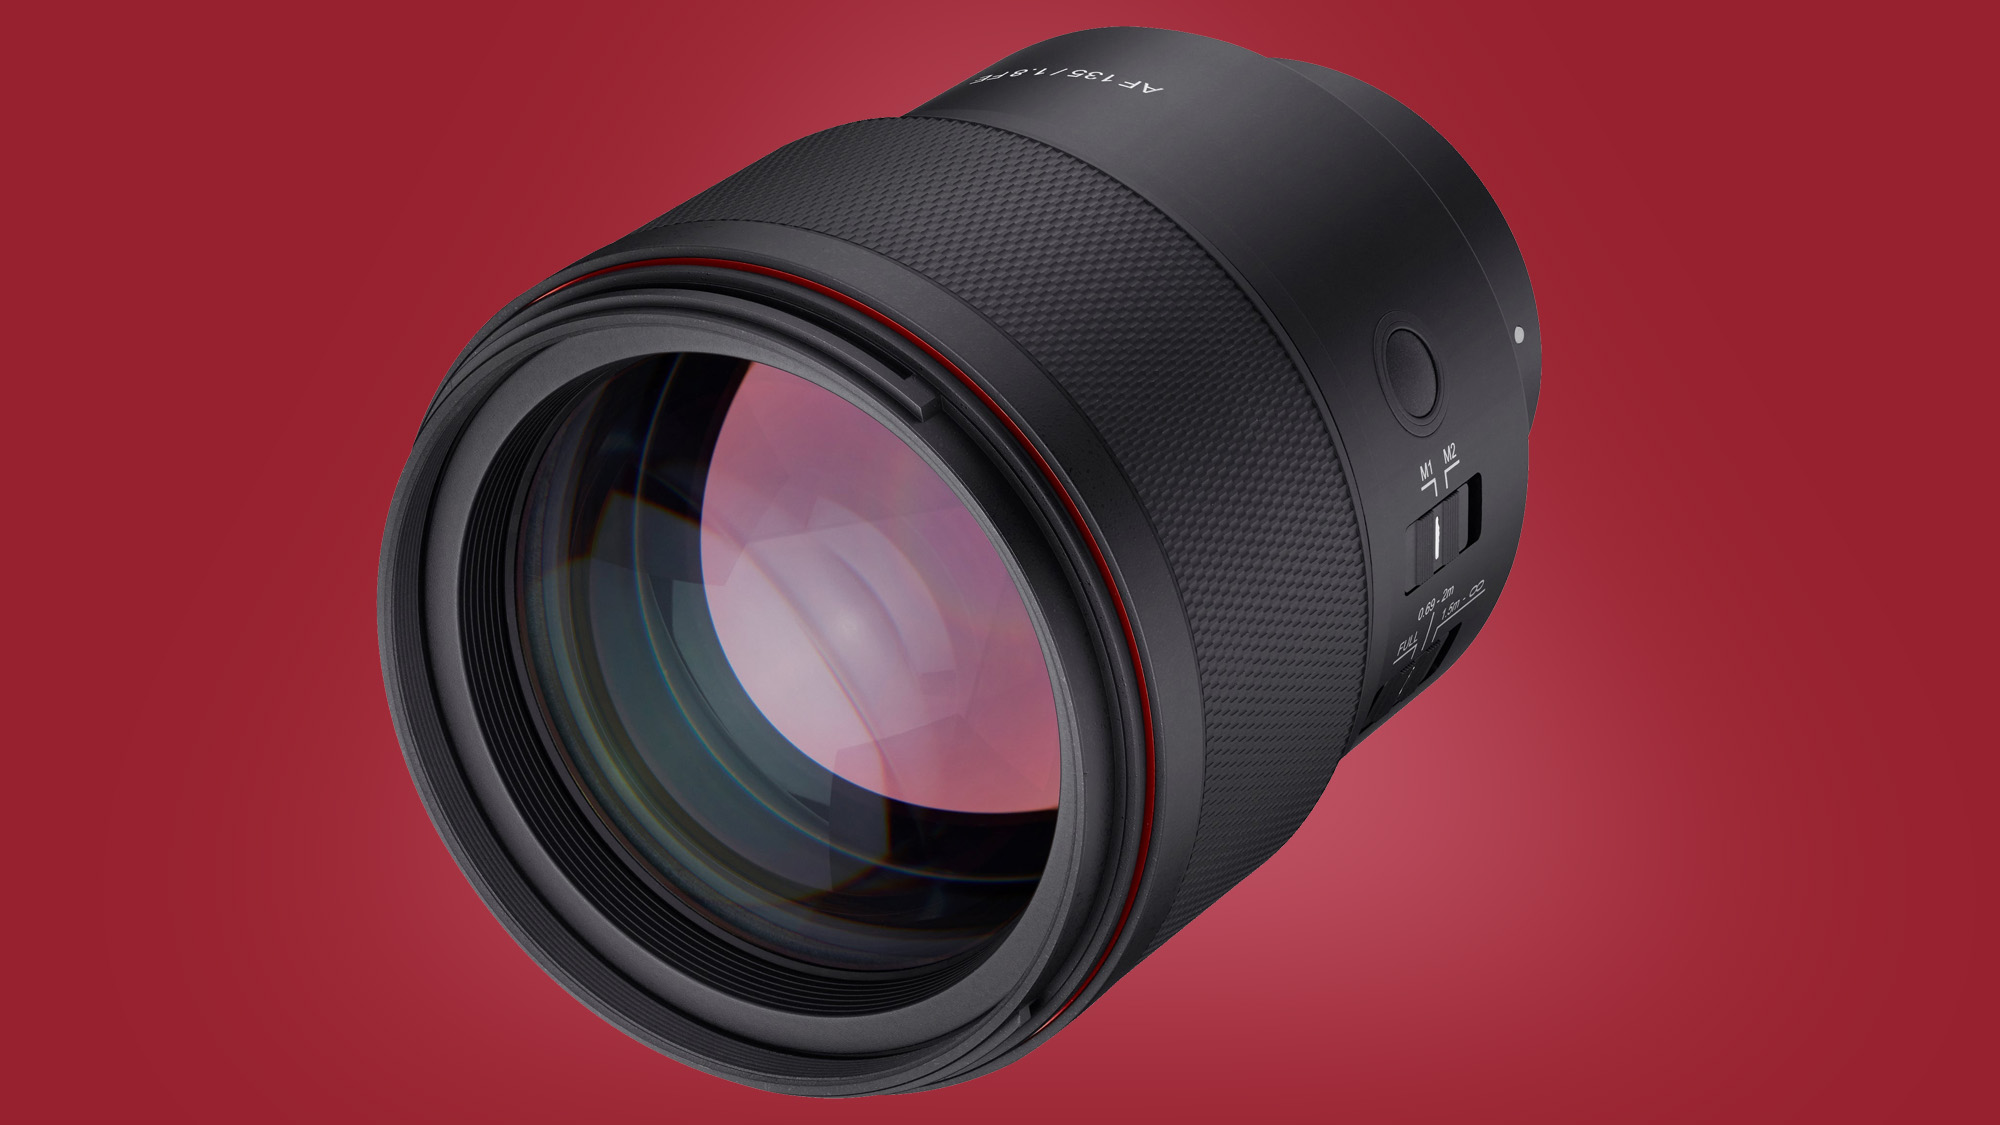 Samyang's 135mm lens could be telephoto bargain for Sony mirrorless cameras